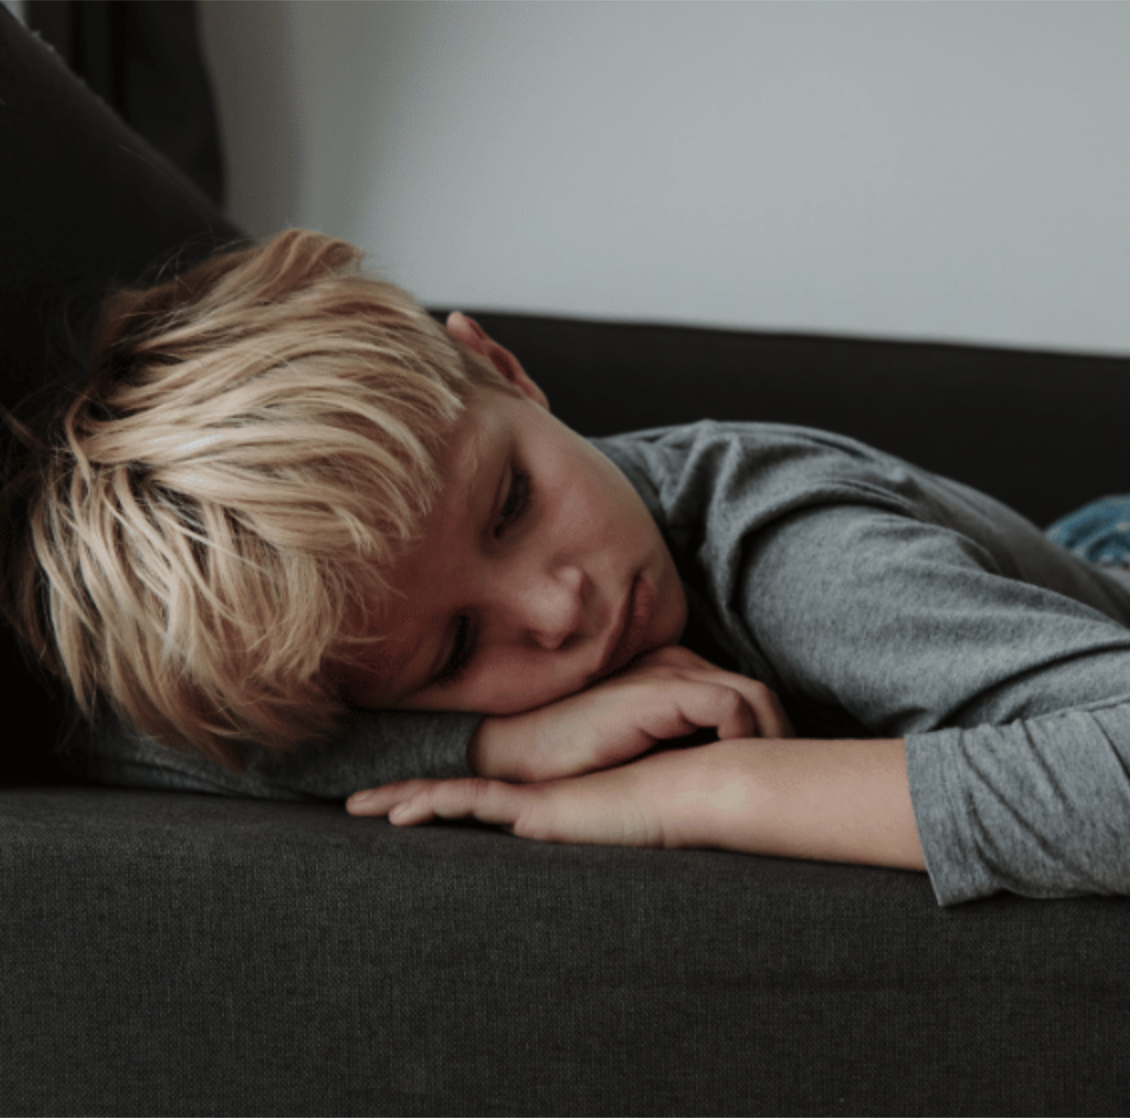 Unhappy child laying on couch with eyes closed